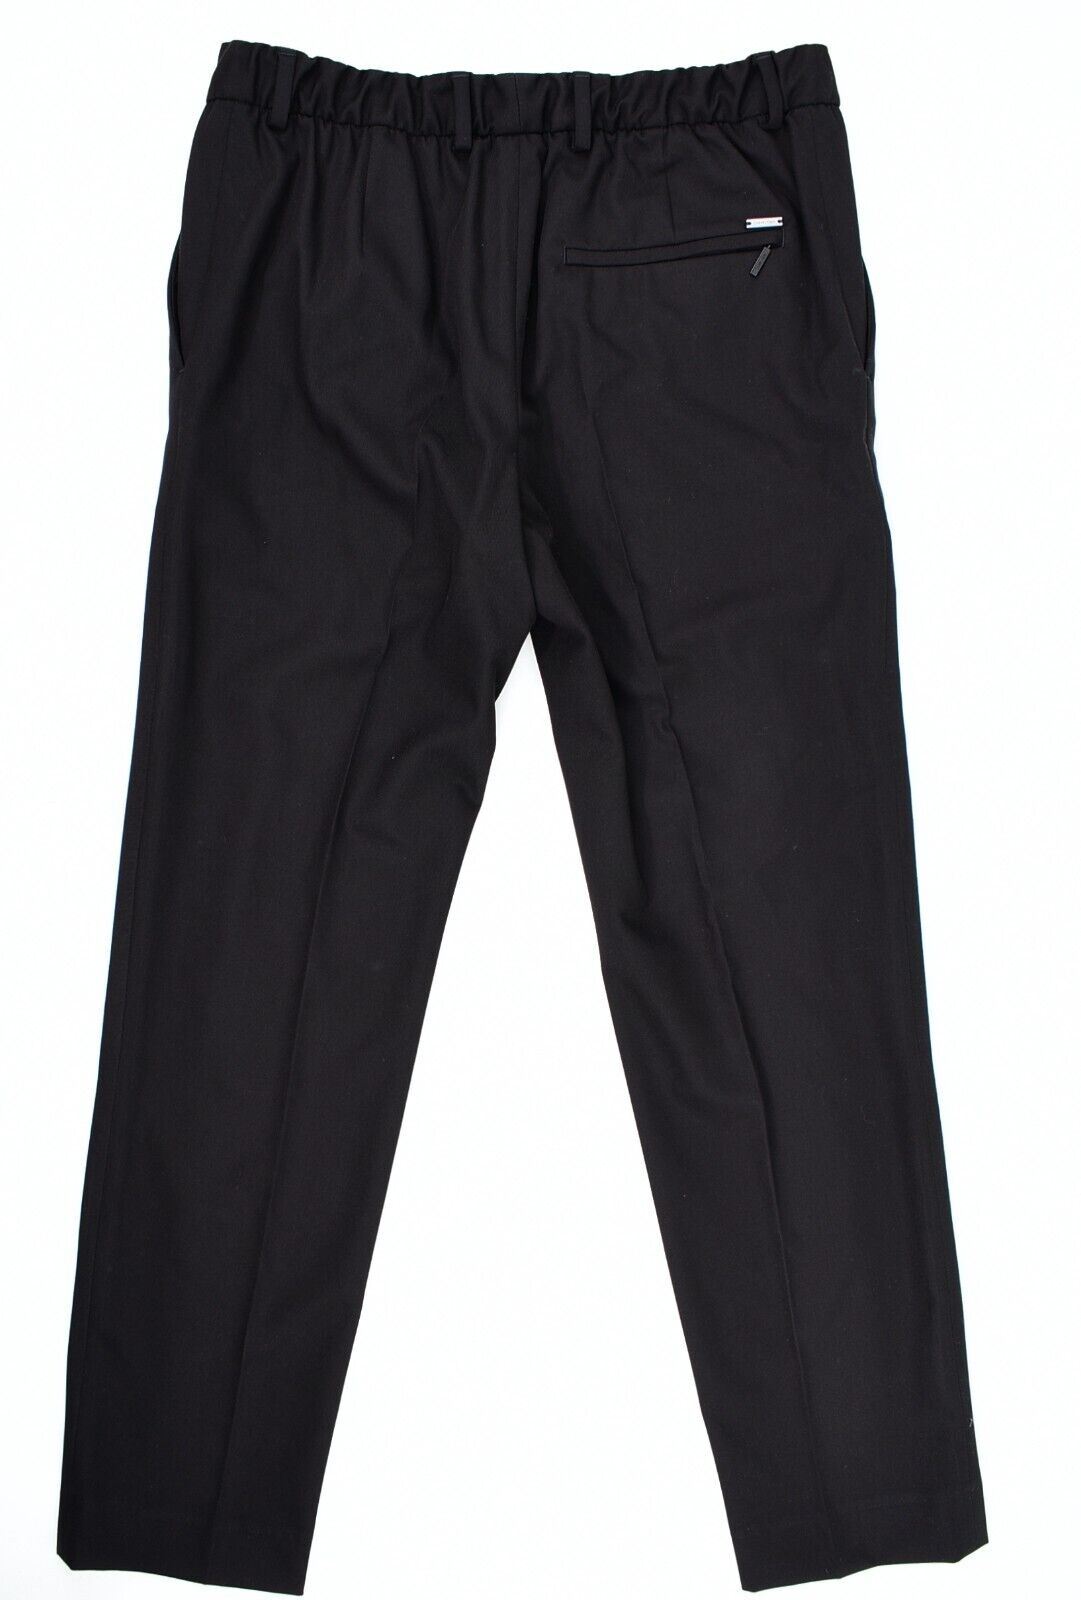 CALVIN KLEIN Men's Tapered Fit Stretch Fabric Trousers, Black, size W30